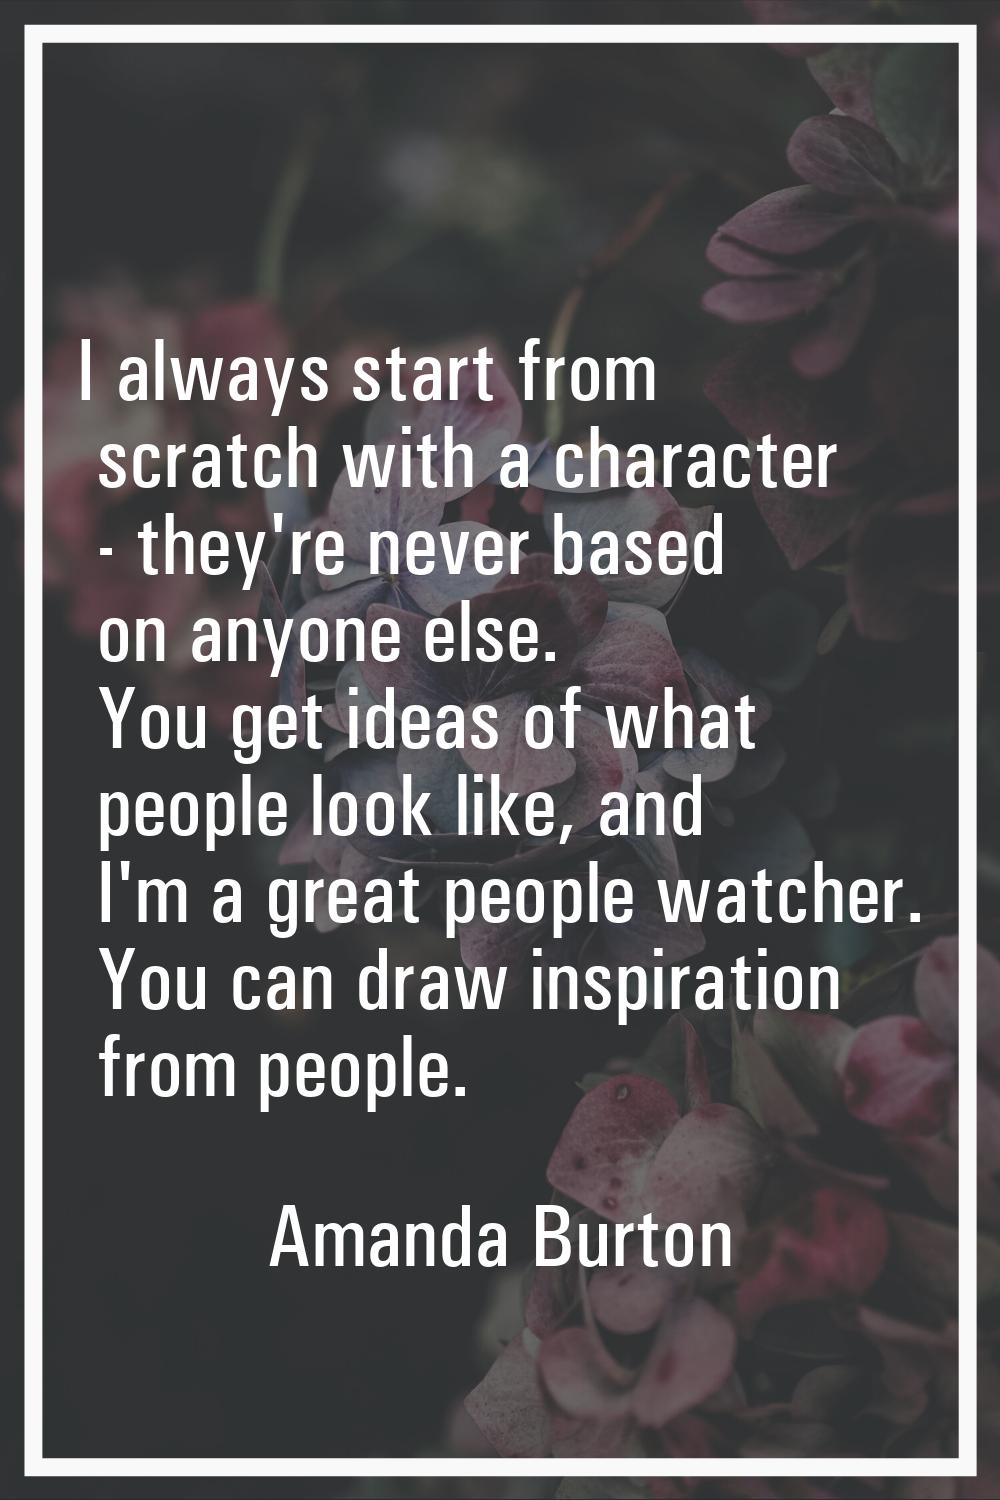 I always start from scratch with a character - they're never based on anyone else. You get ideas of